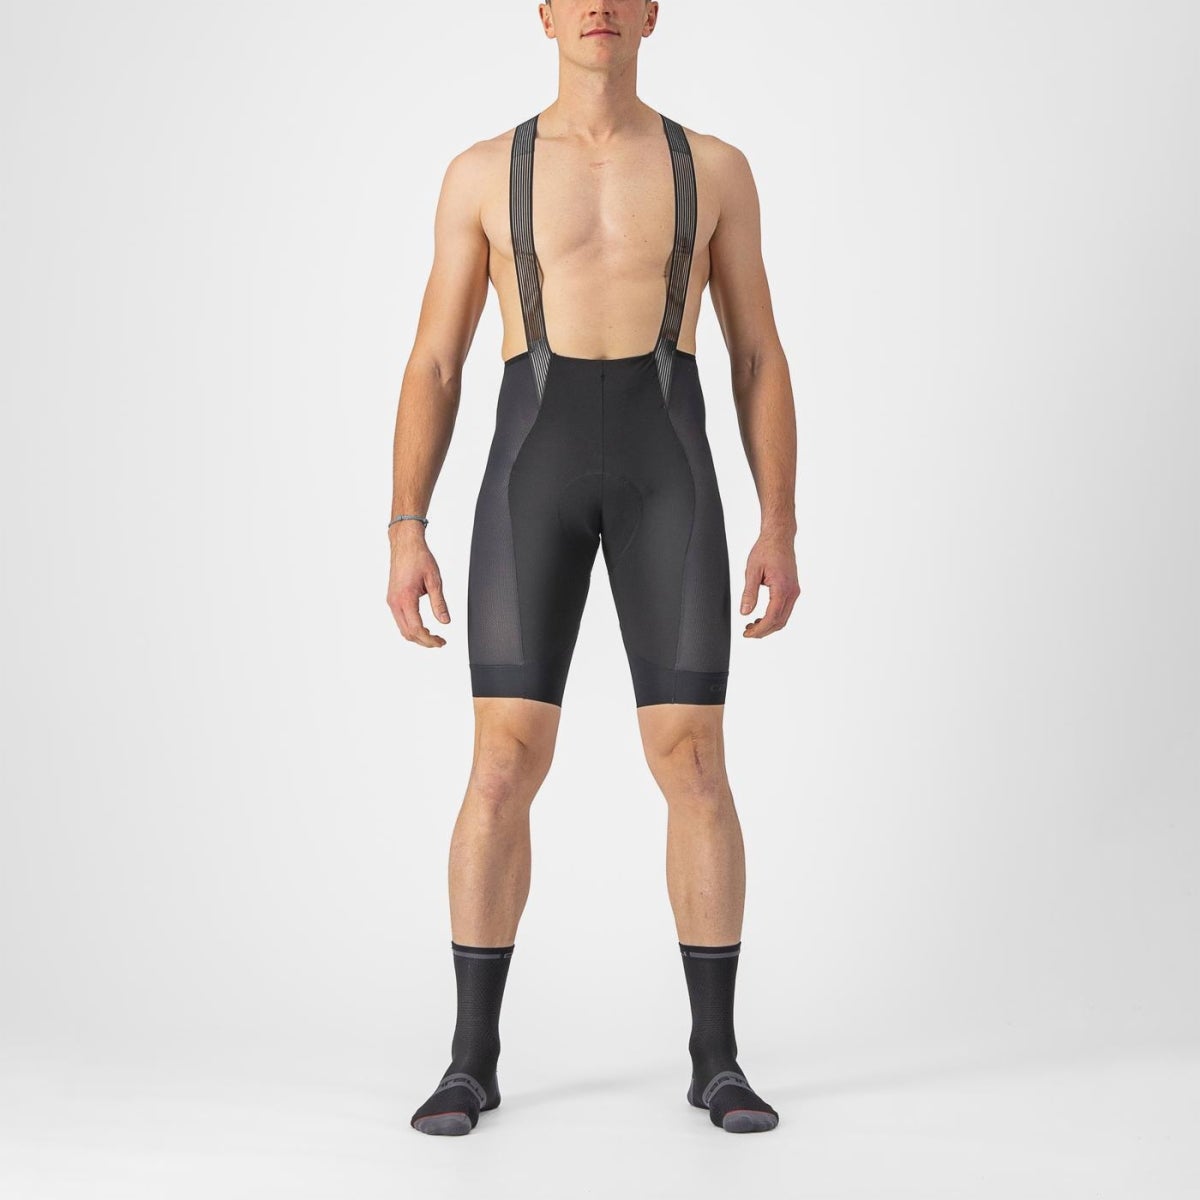 If your butt hurts on the bike, pts recommend these shorts